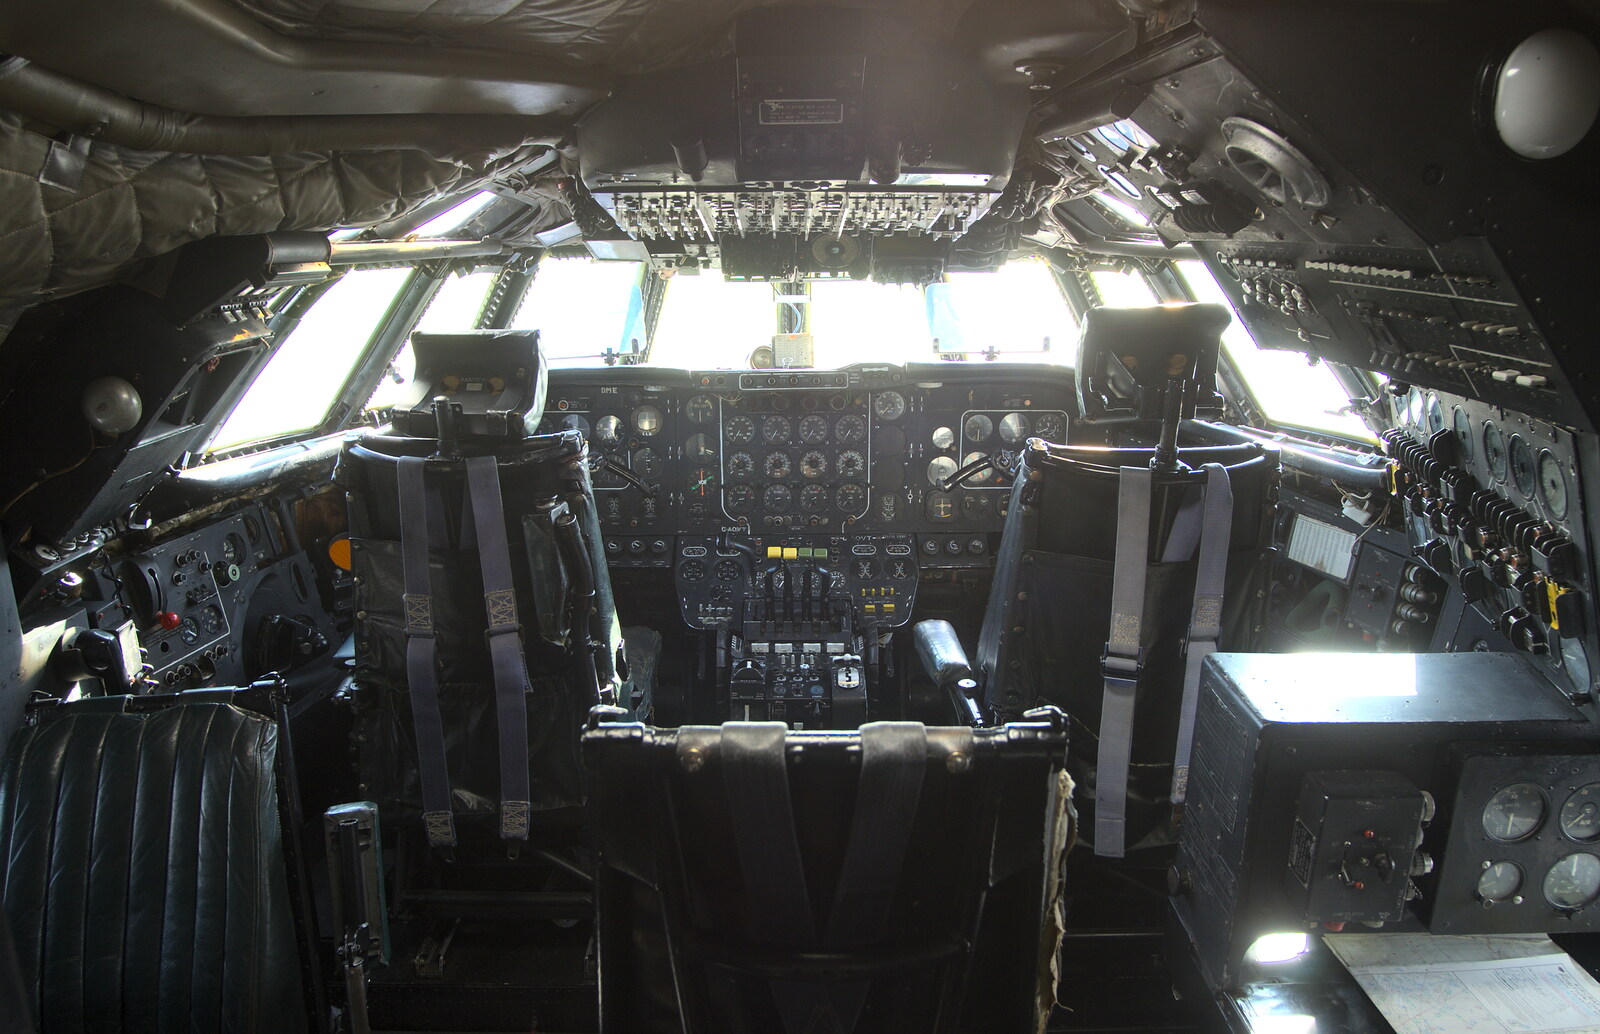 The flight deck of a Bristol Britannia from A Day Out at Duxford, Cambridgeshire - 9th March 2014